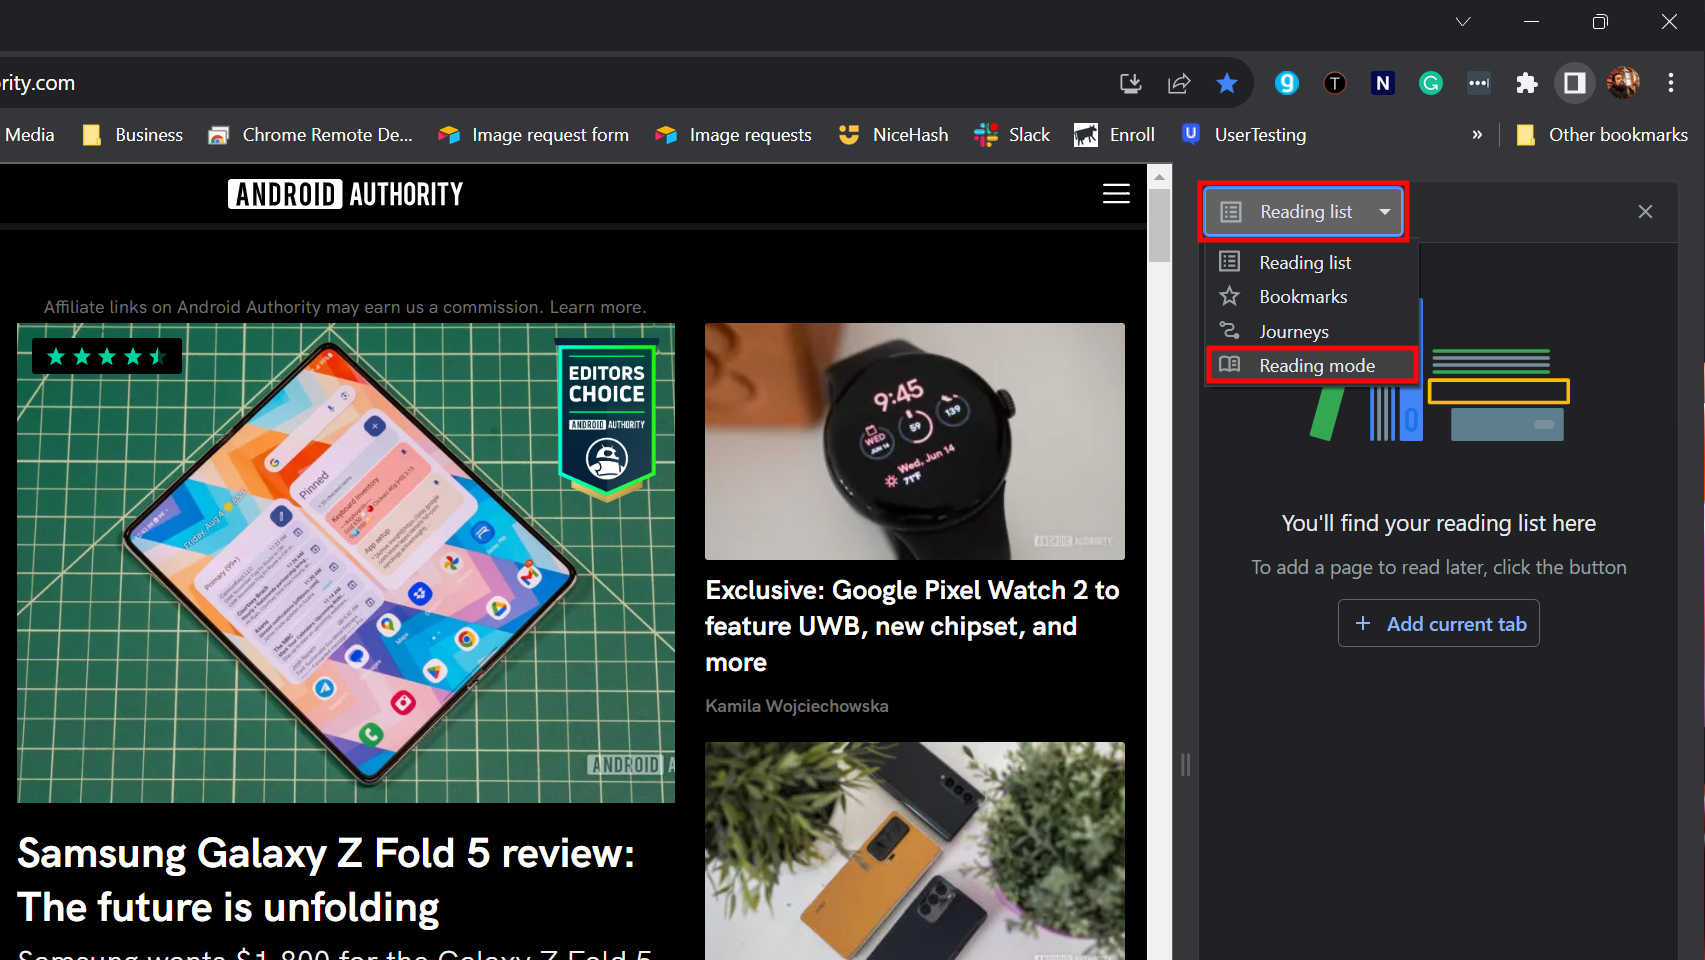 How to use Reading mode on Chrome for PC 2